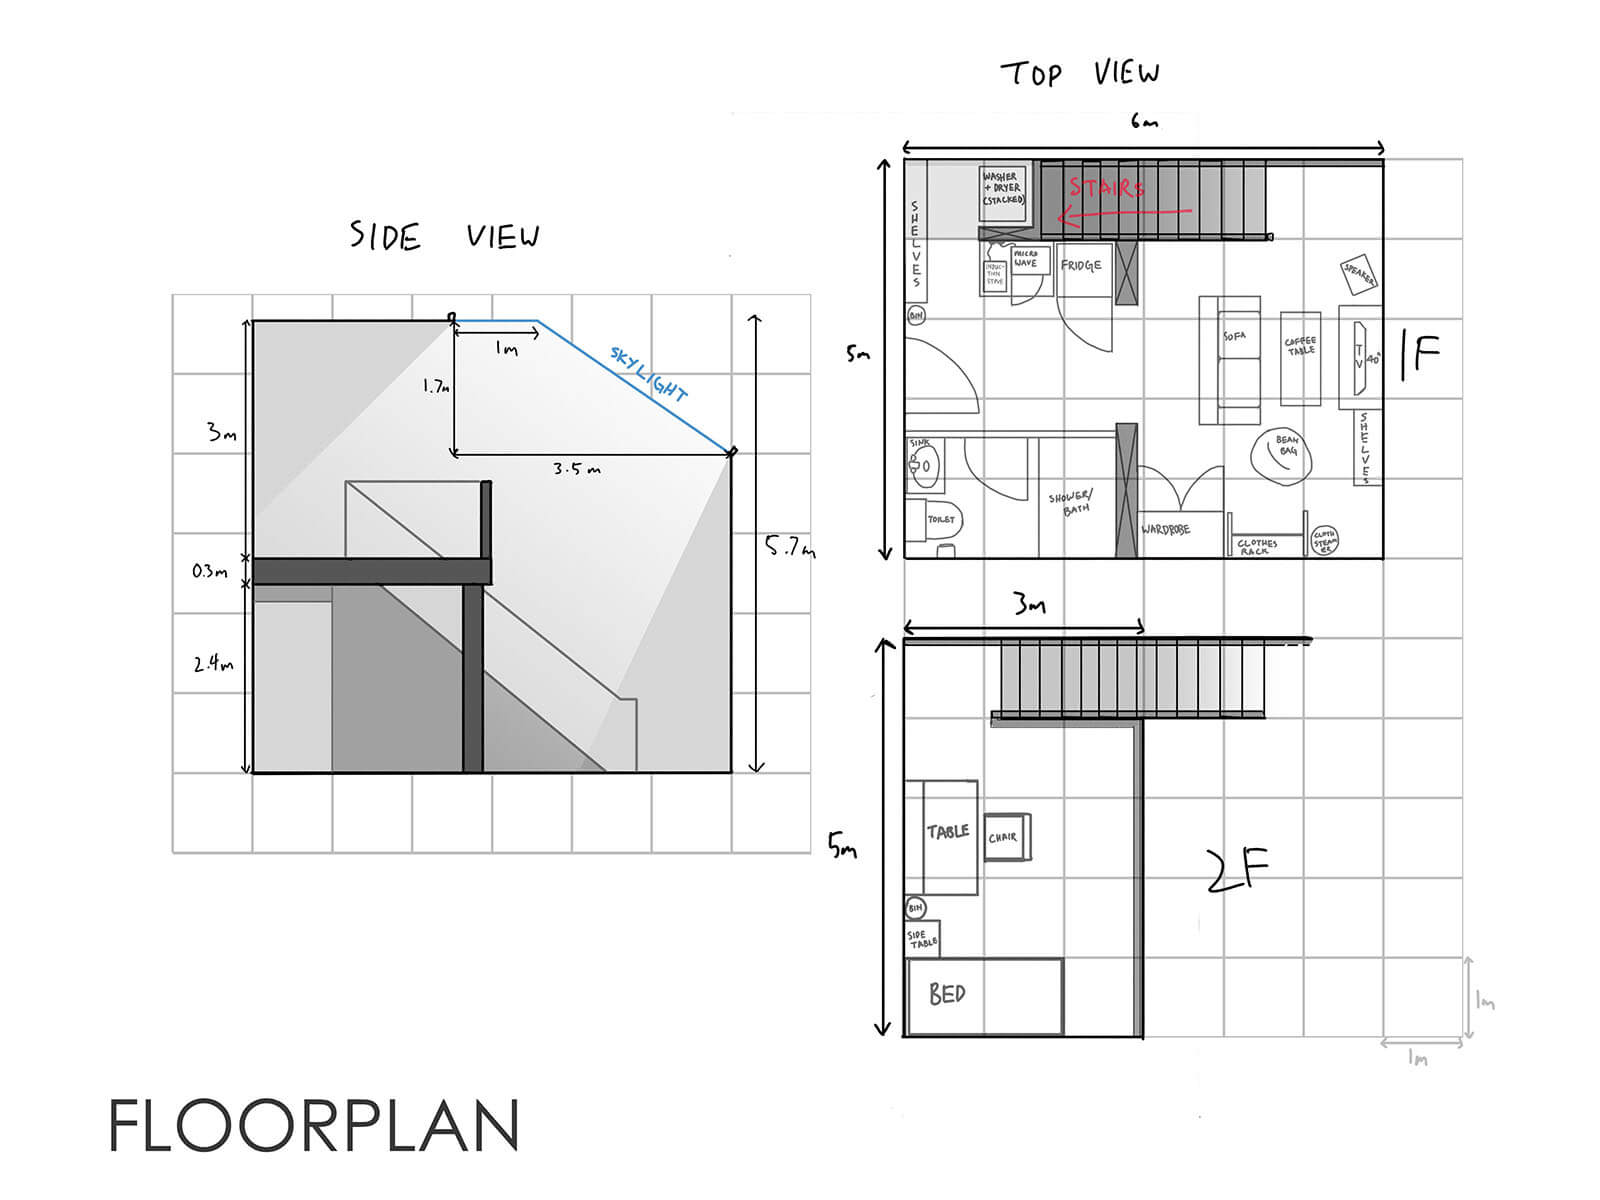 Top-down view of a Floorplan for a small apartment